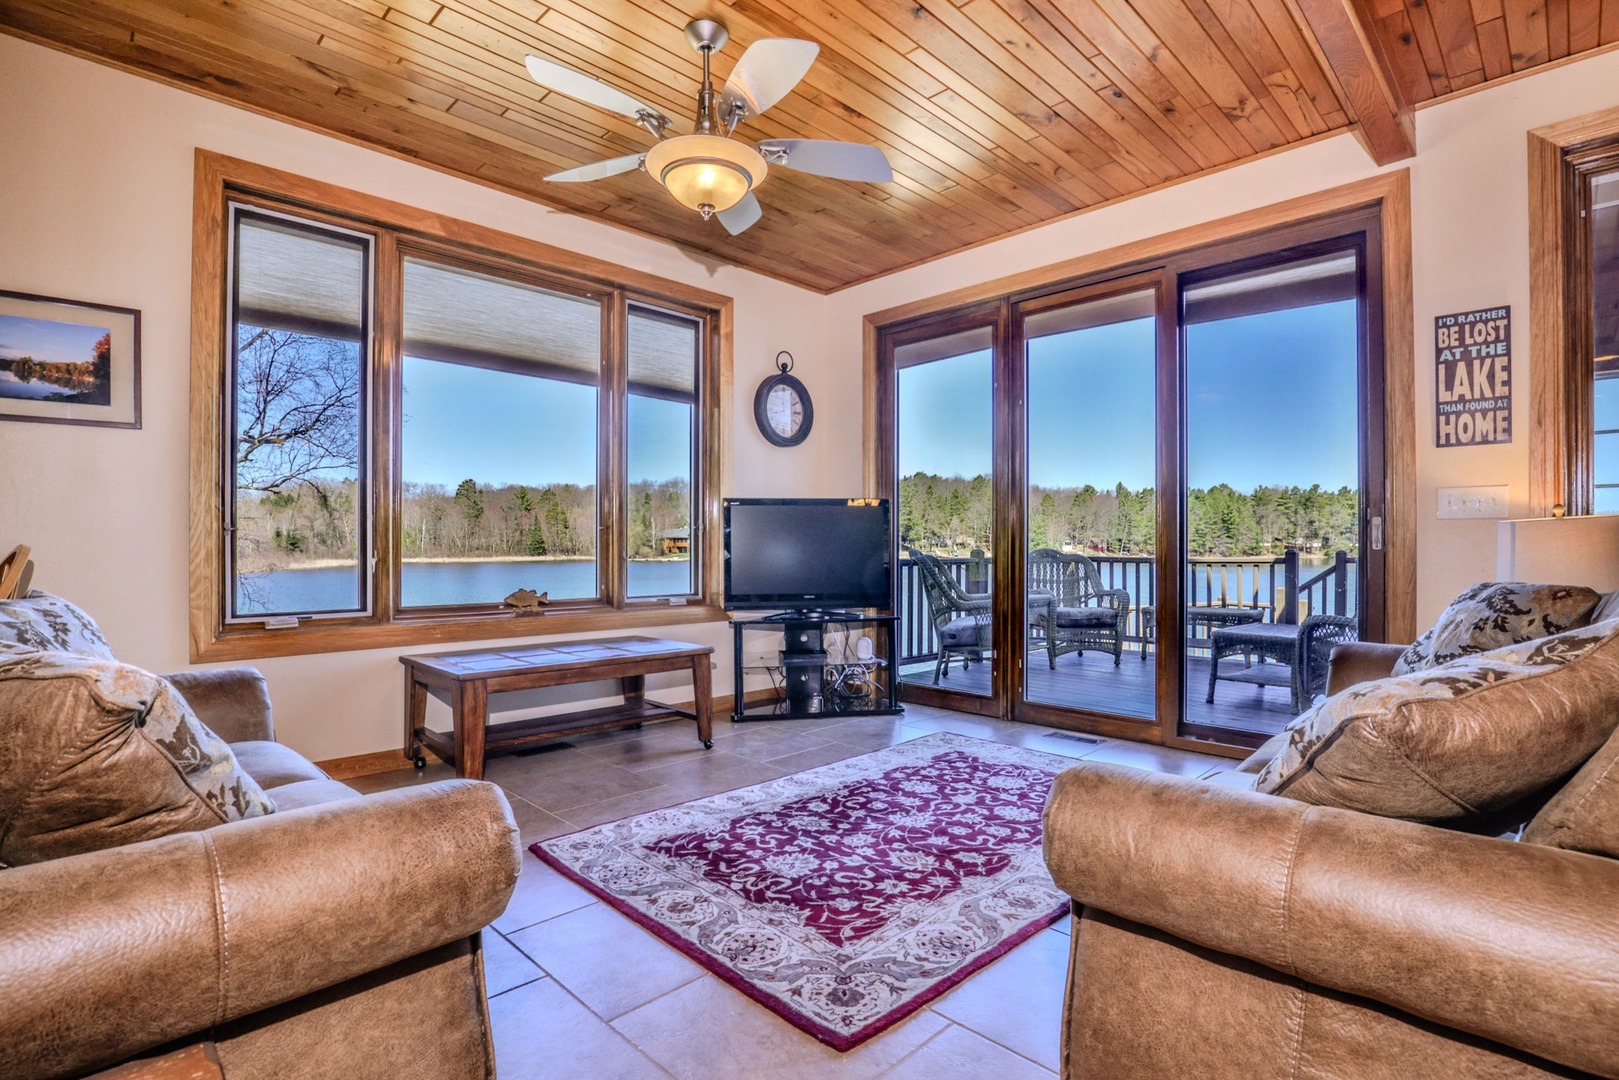 Shoreview Lake house - Hiller Vacation Homes